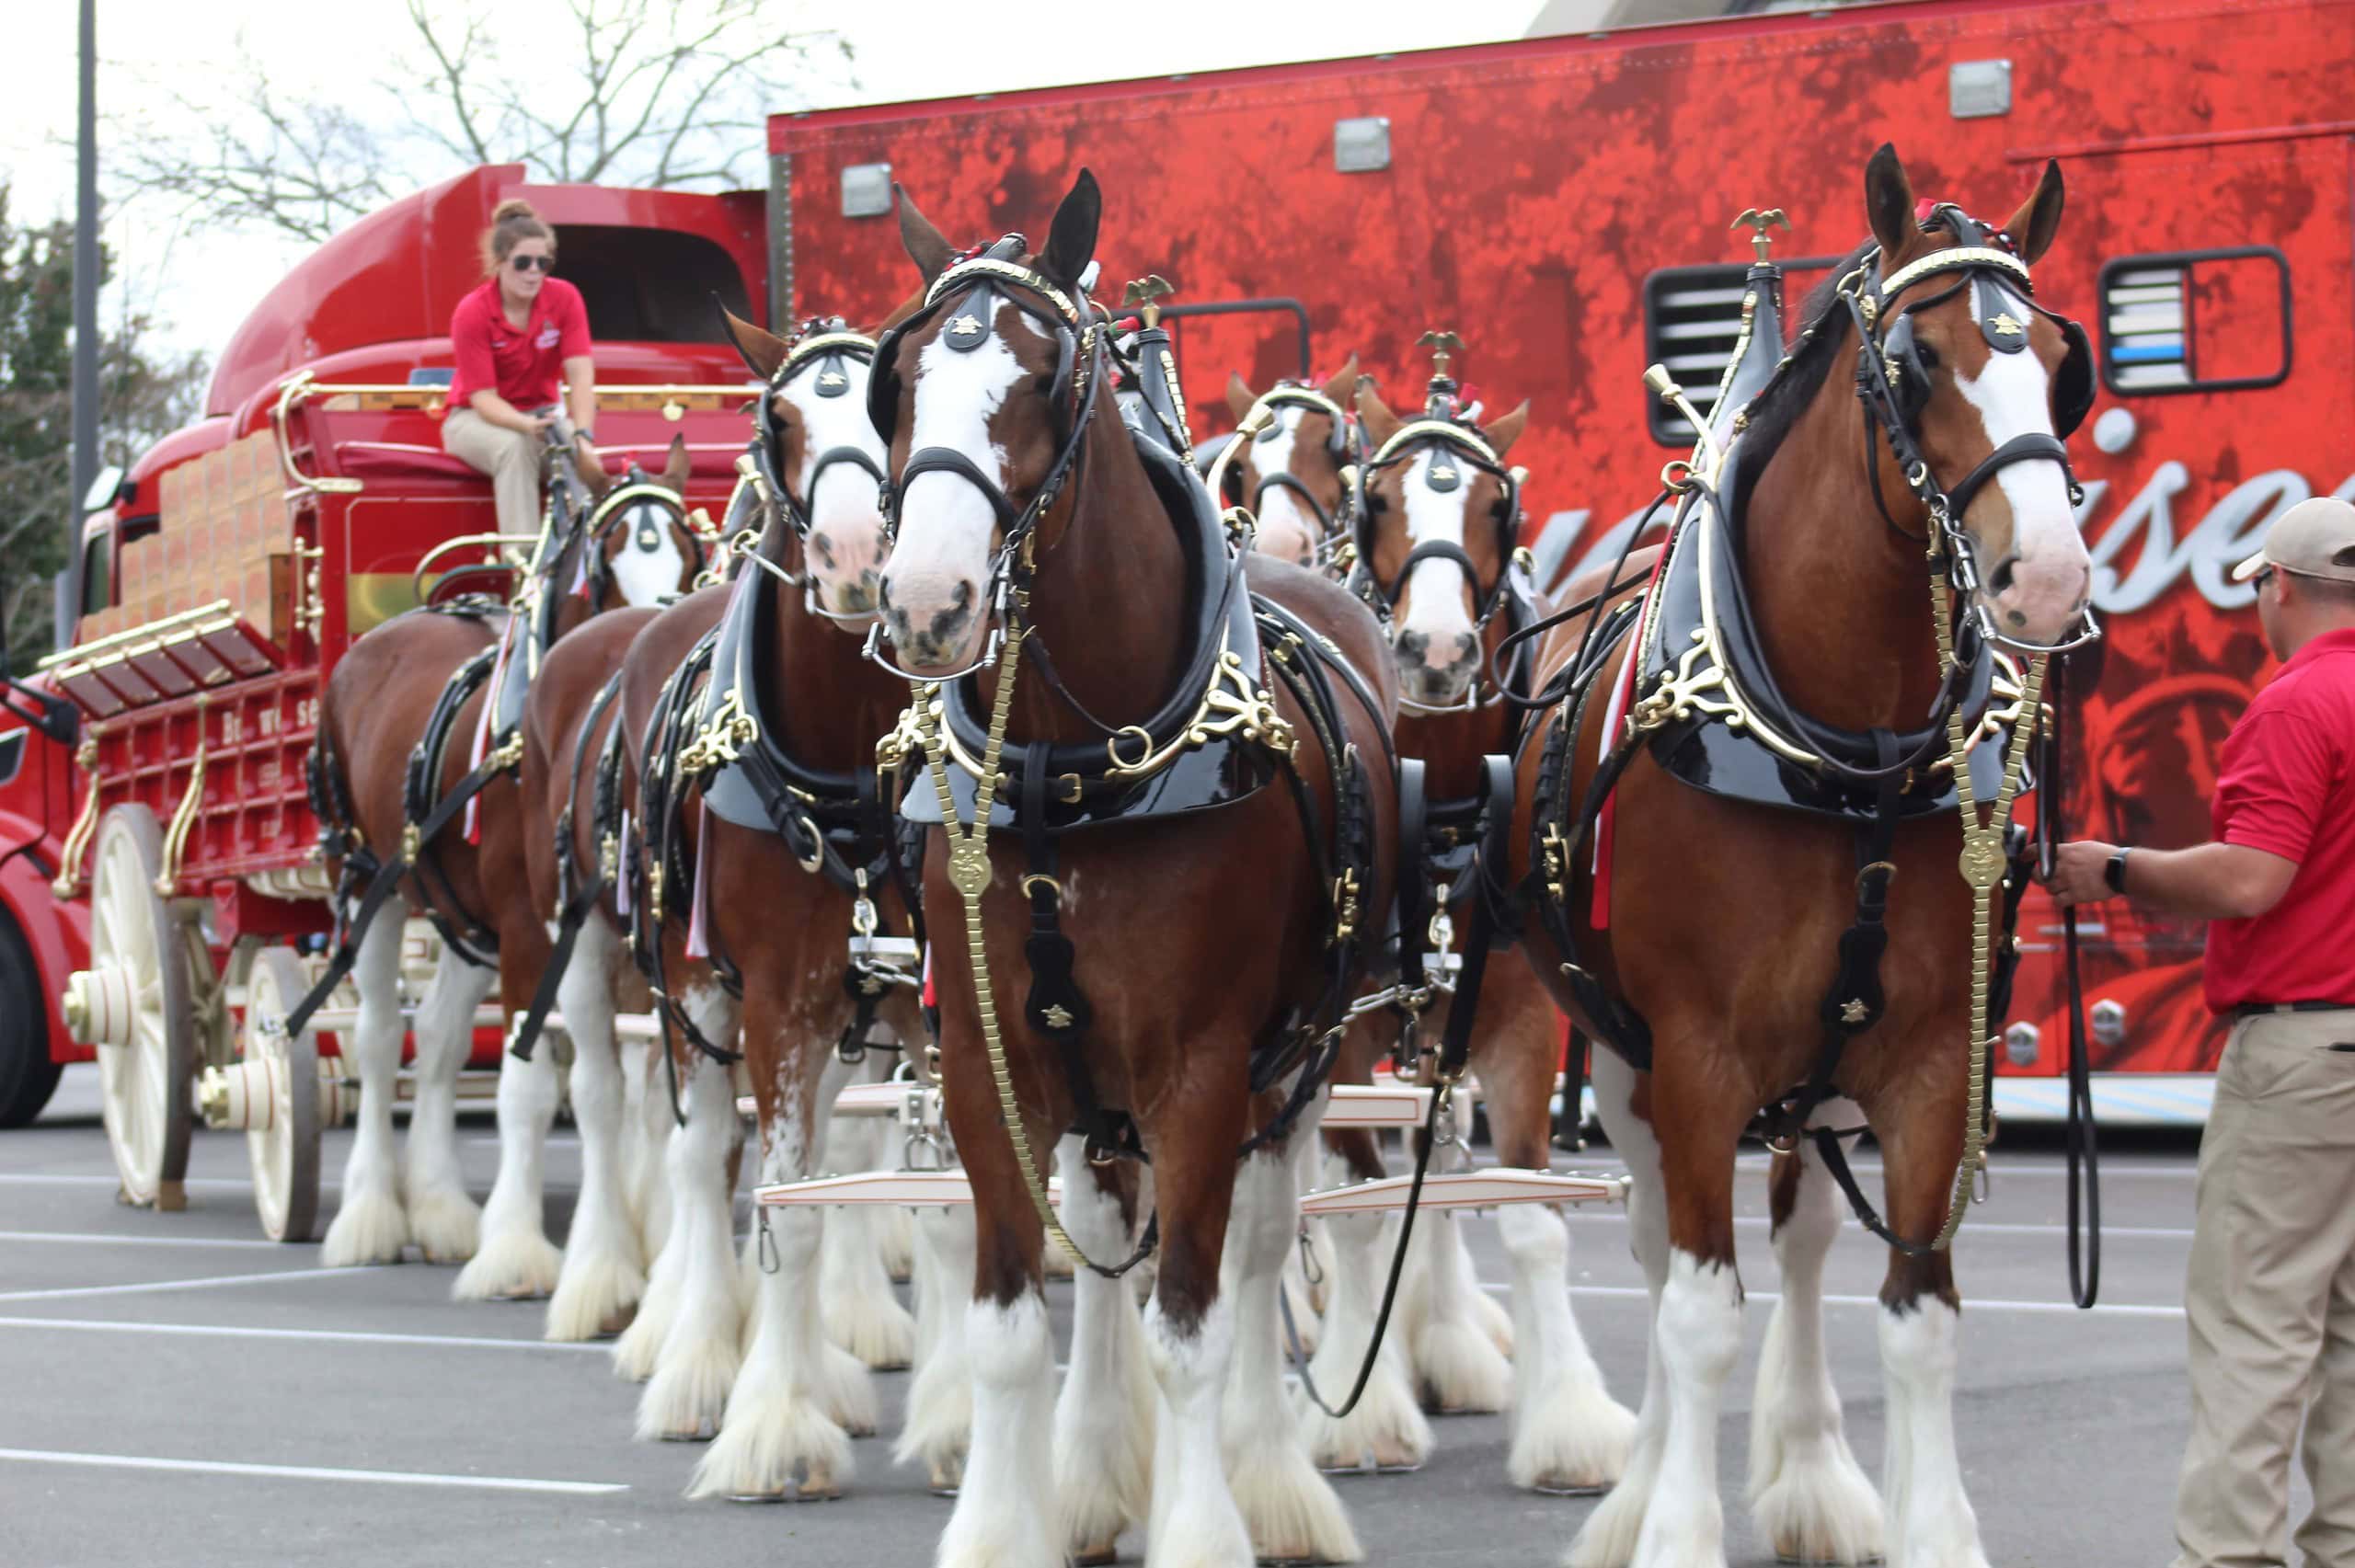 Budweiser Clydesdales Set to Visit Alpharetta for a Monumental Event